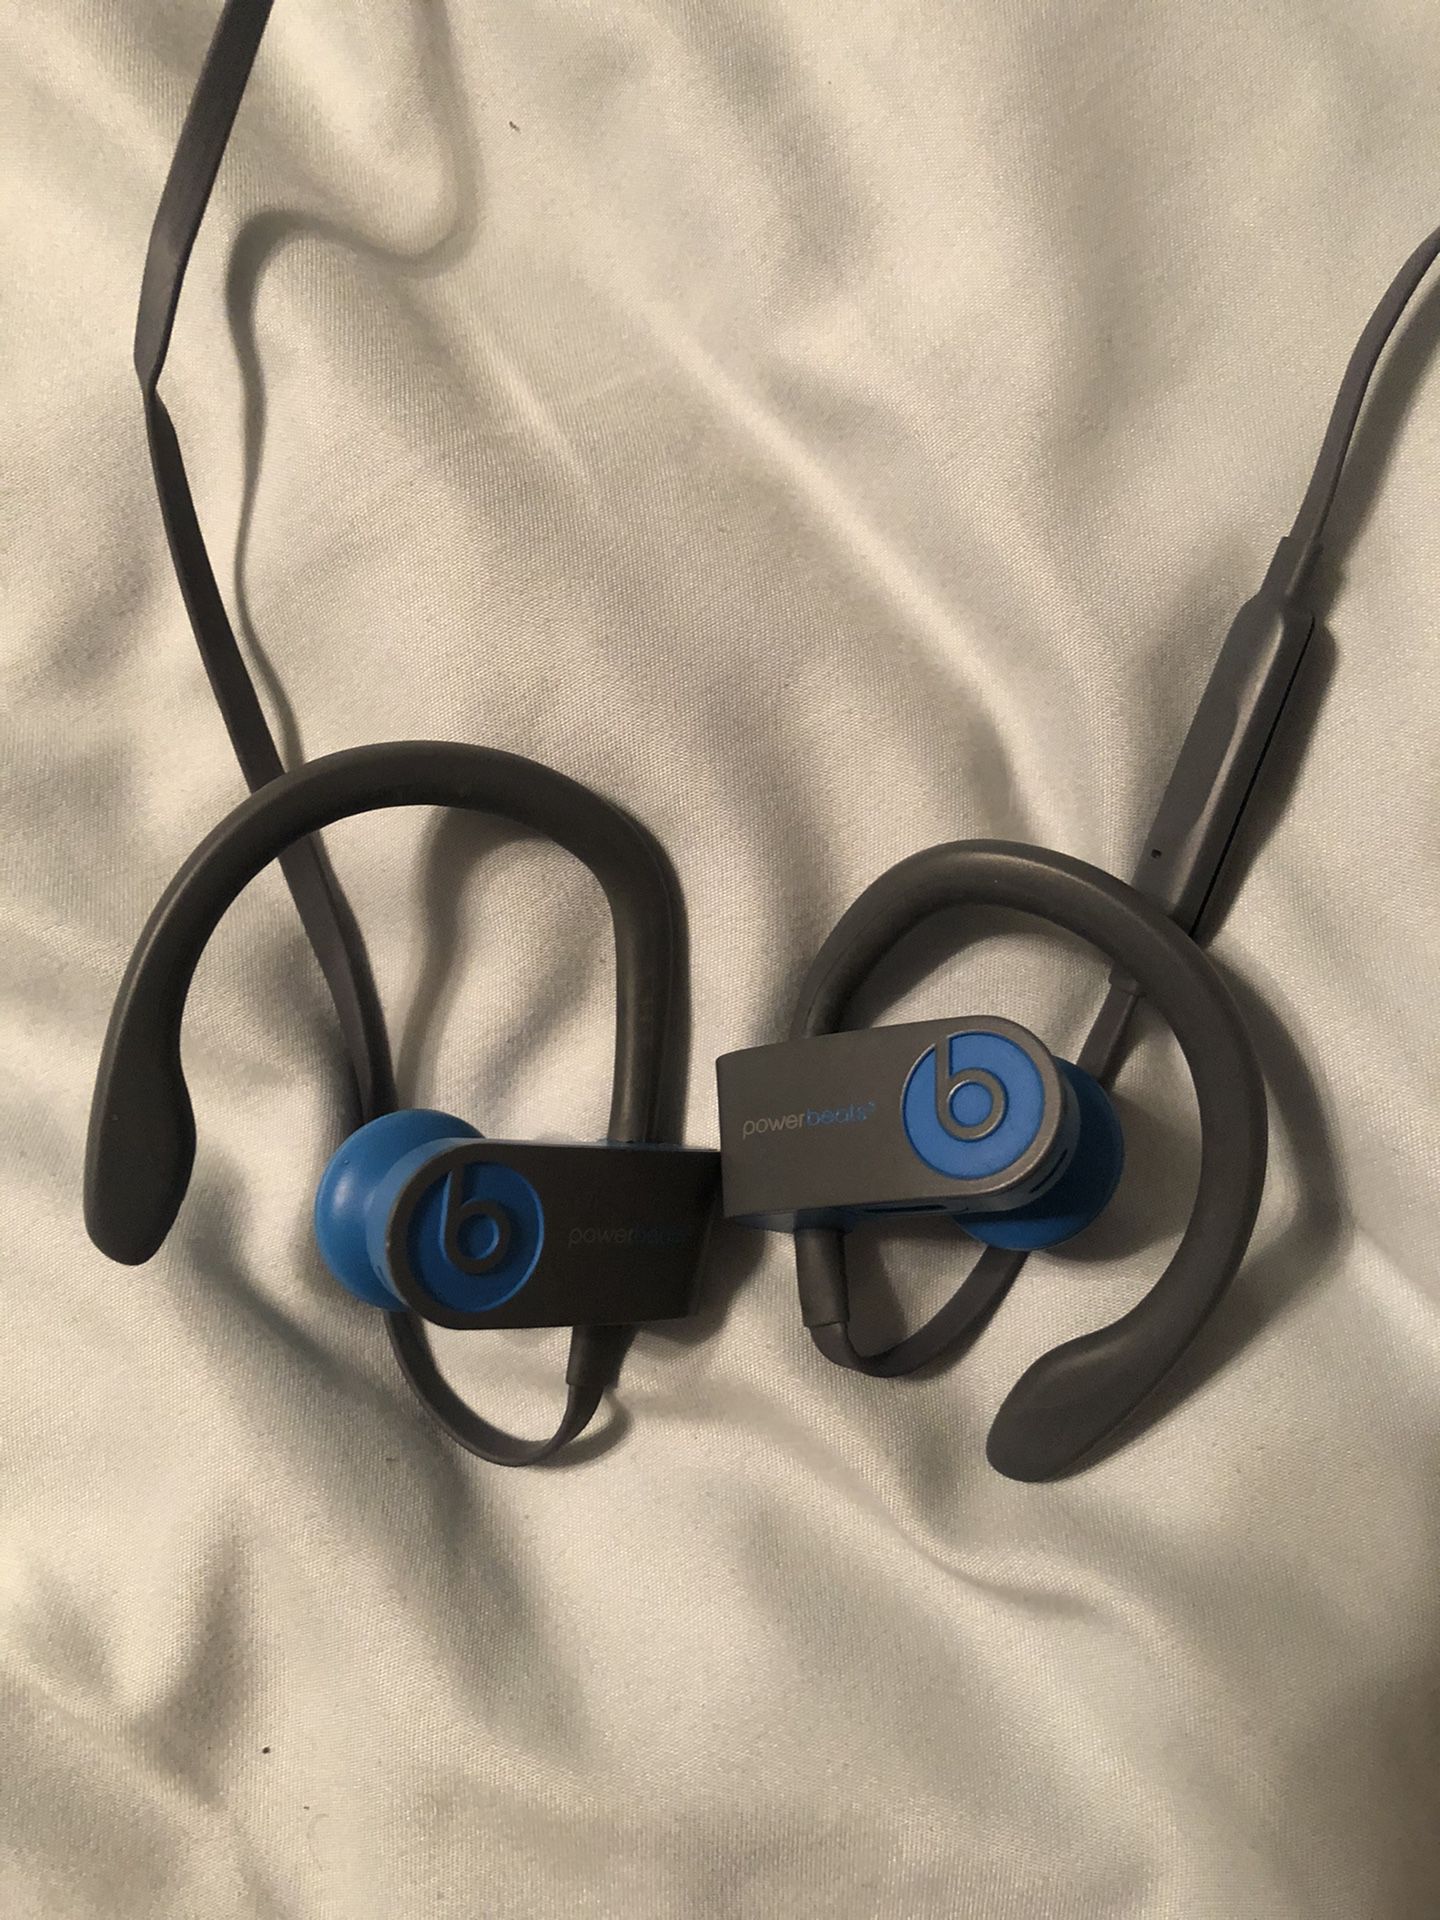 PowerBeats3 In Excellent Condition . Blue And Used Maybe 10 Times At Most! Works Amazing!